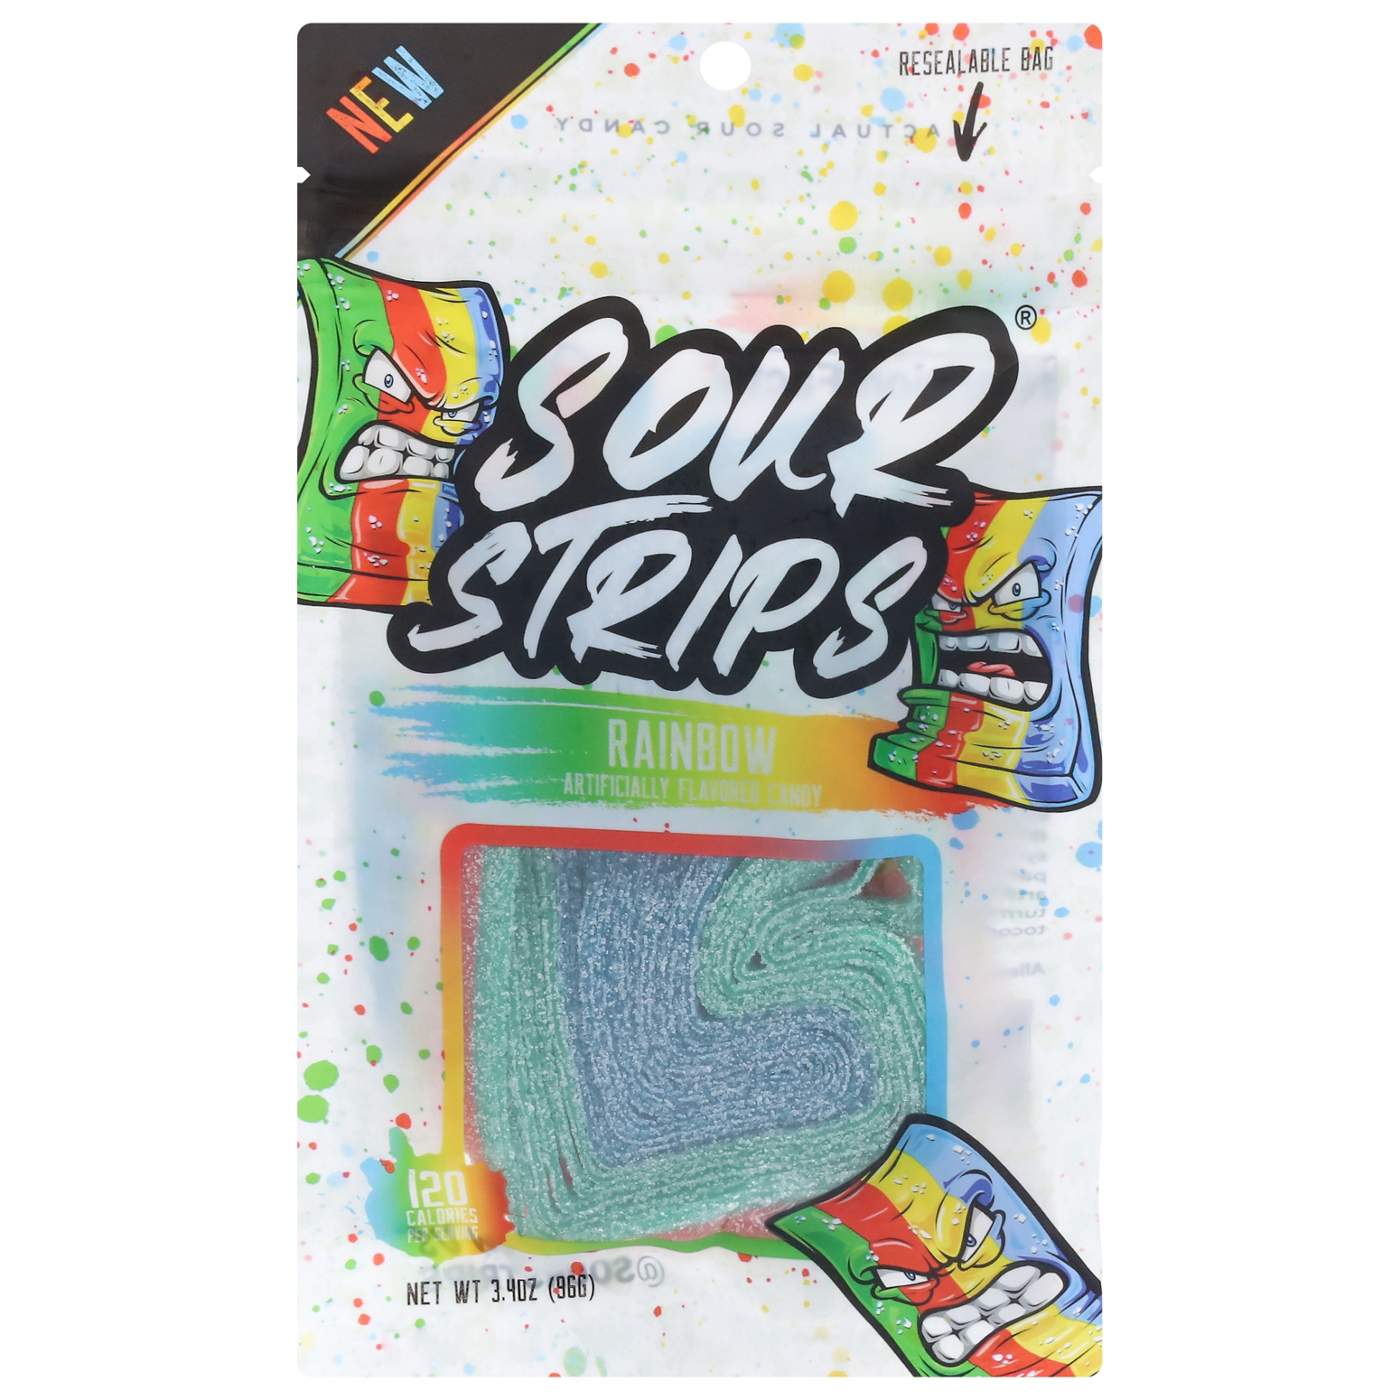 Sour Strips Rainbow Flavor Candy; image 1 of 2